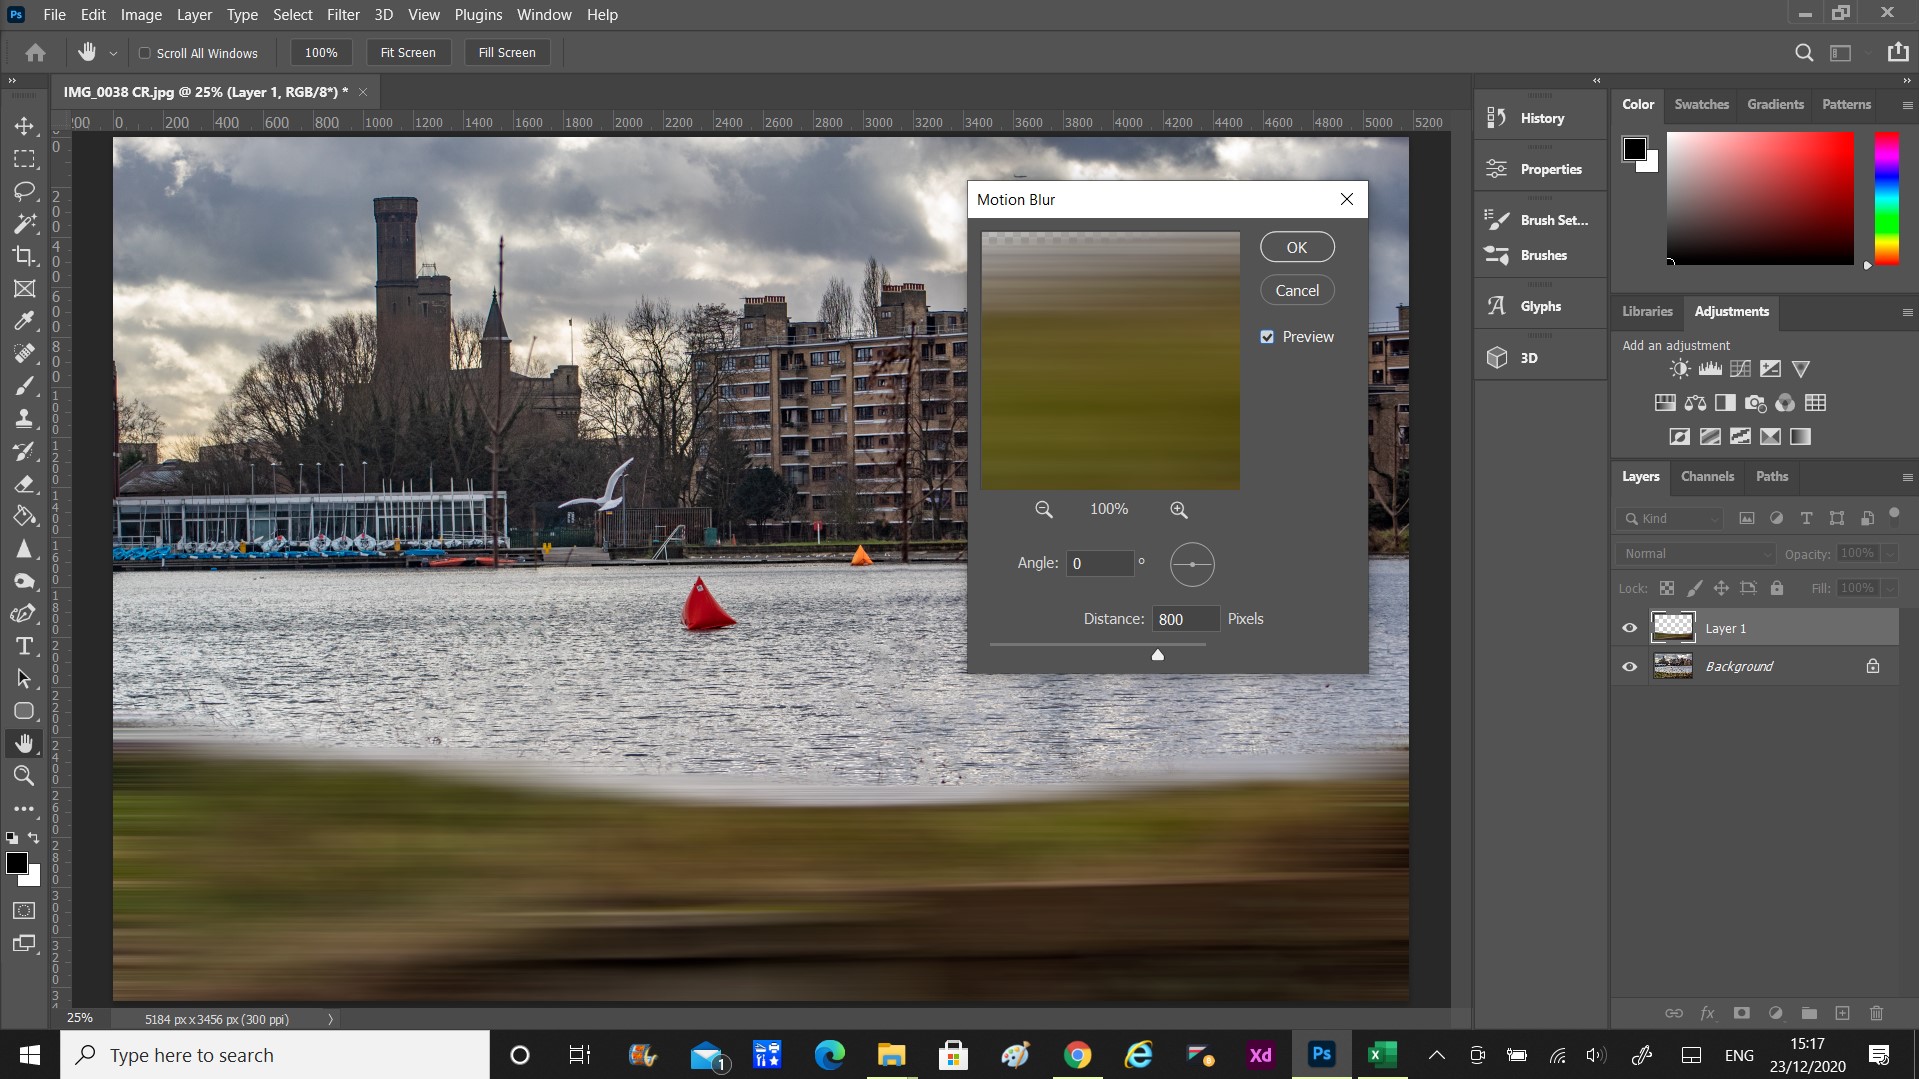 How to Blur Foreground With a DSLR! Motion blur effect in Adobe Photoshop.